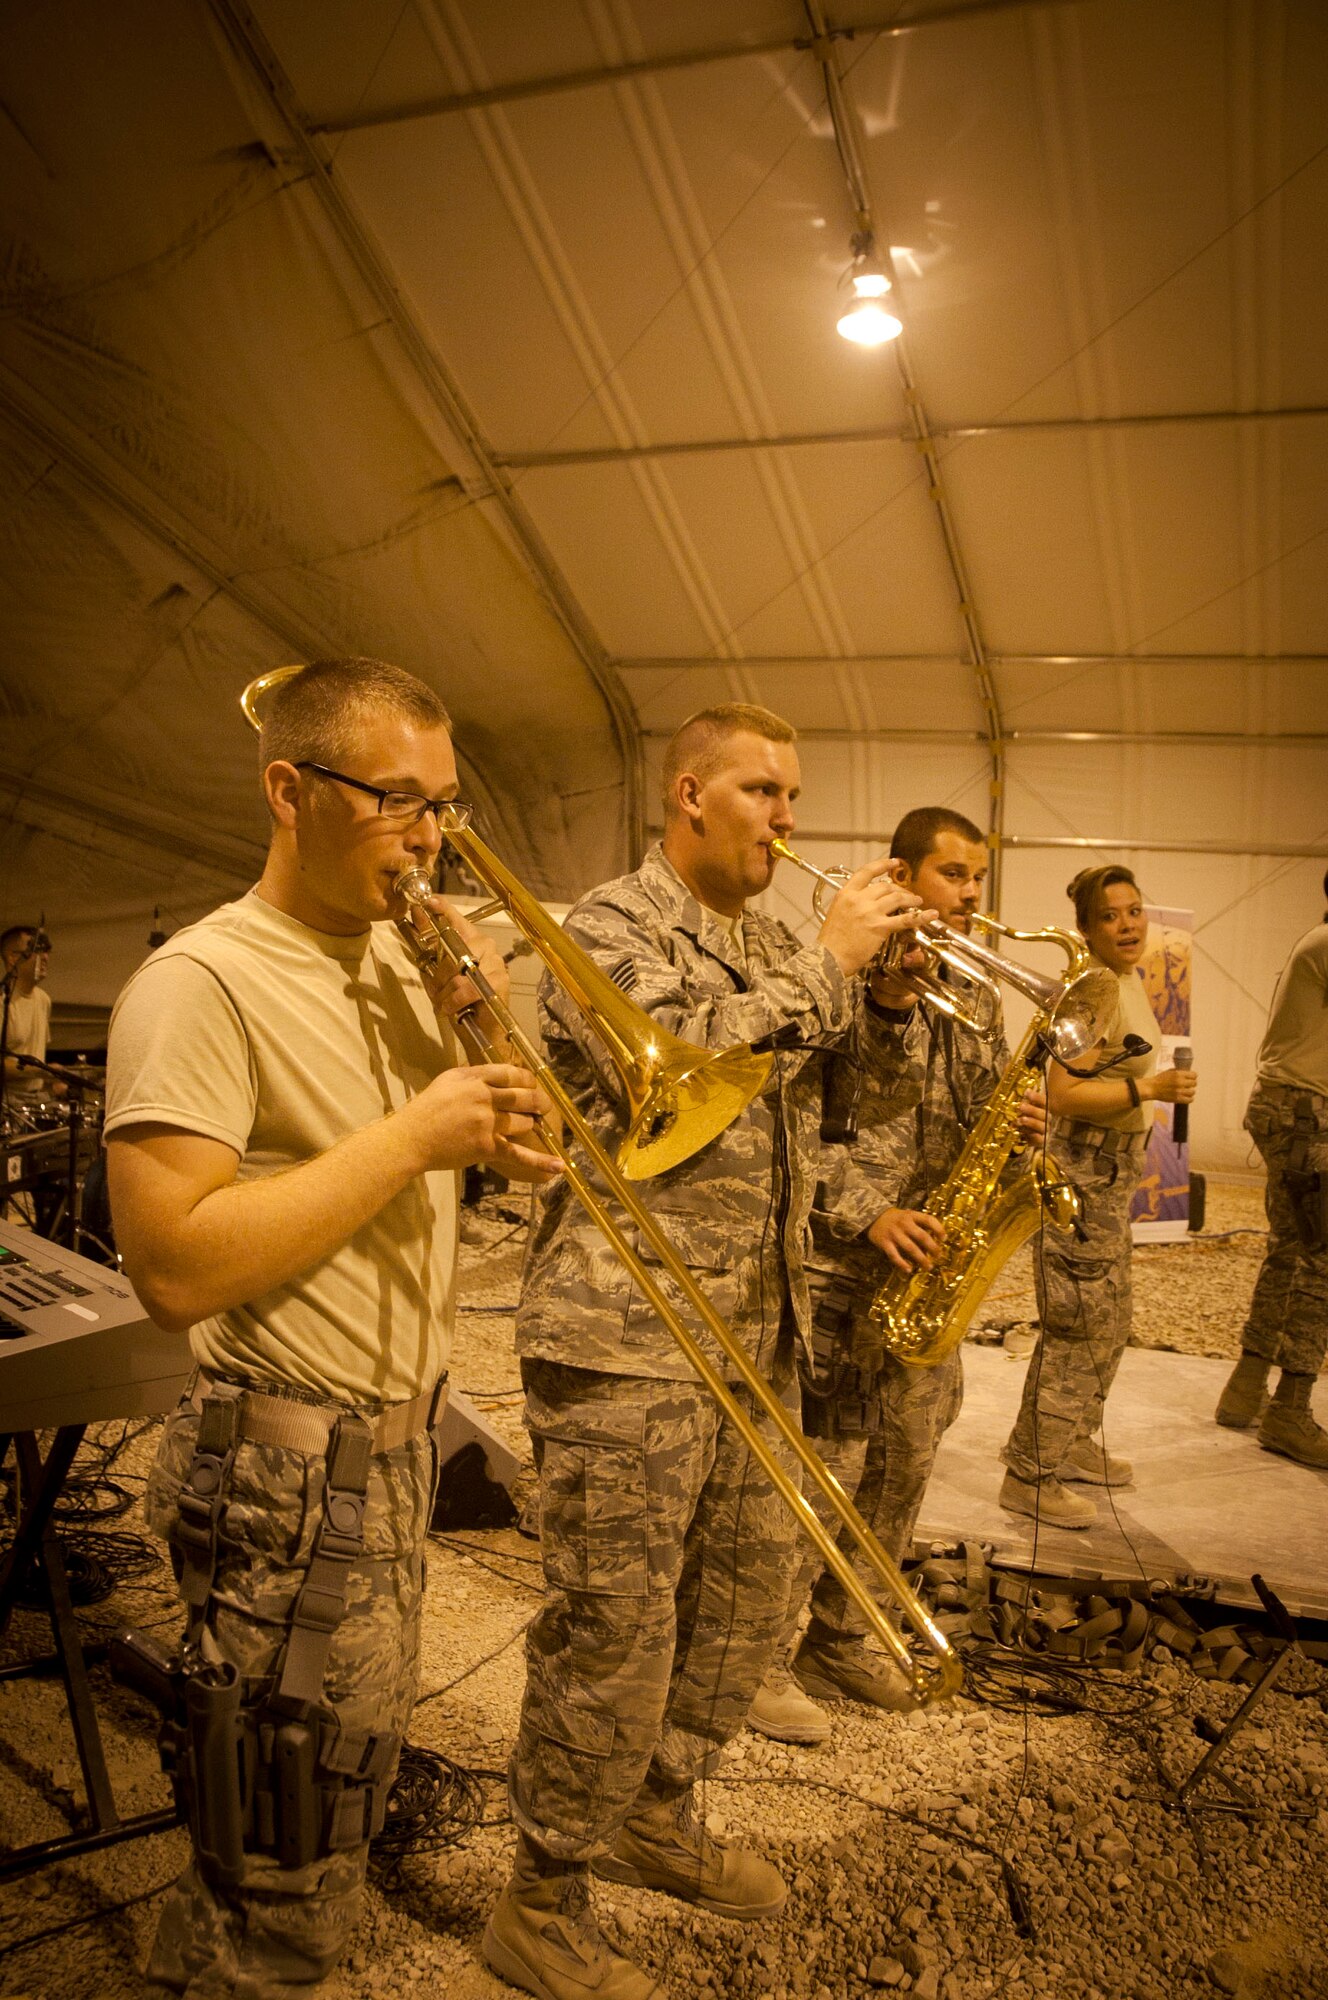 Staff Sergeants Devin Larue, Ransom Miller andToby Callaway perform as the AFCENT band "Sidewinder" for military members at Shindand Airbase, Afghanistan, Aug. 10, 2011. The band plays new and old hits of country, hip hop and rock. (U.S. Air Force photo/Senior Airman Corey Hook)